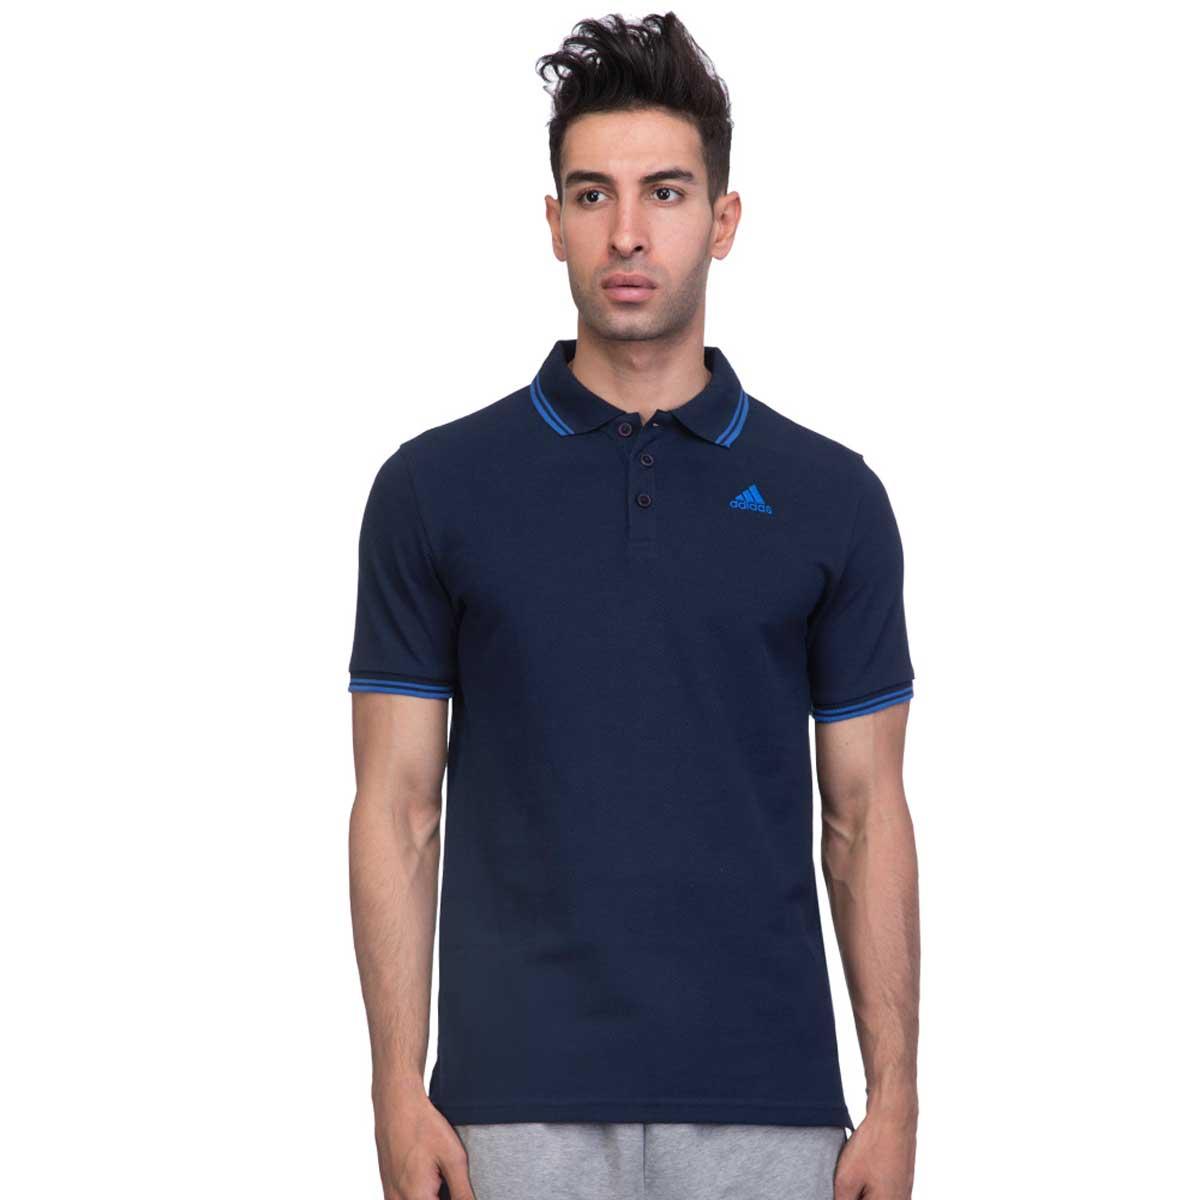 Buy Adidas AESS Mens Polo T-Shirts (Conavy) Online at Lowest Price in India